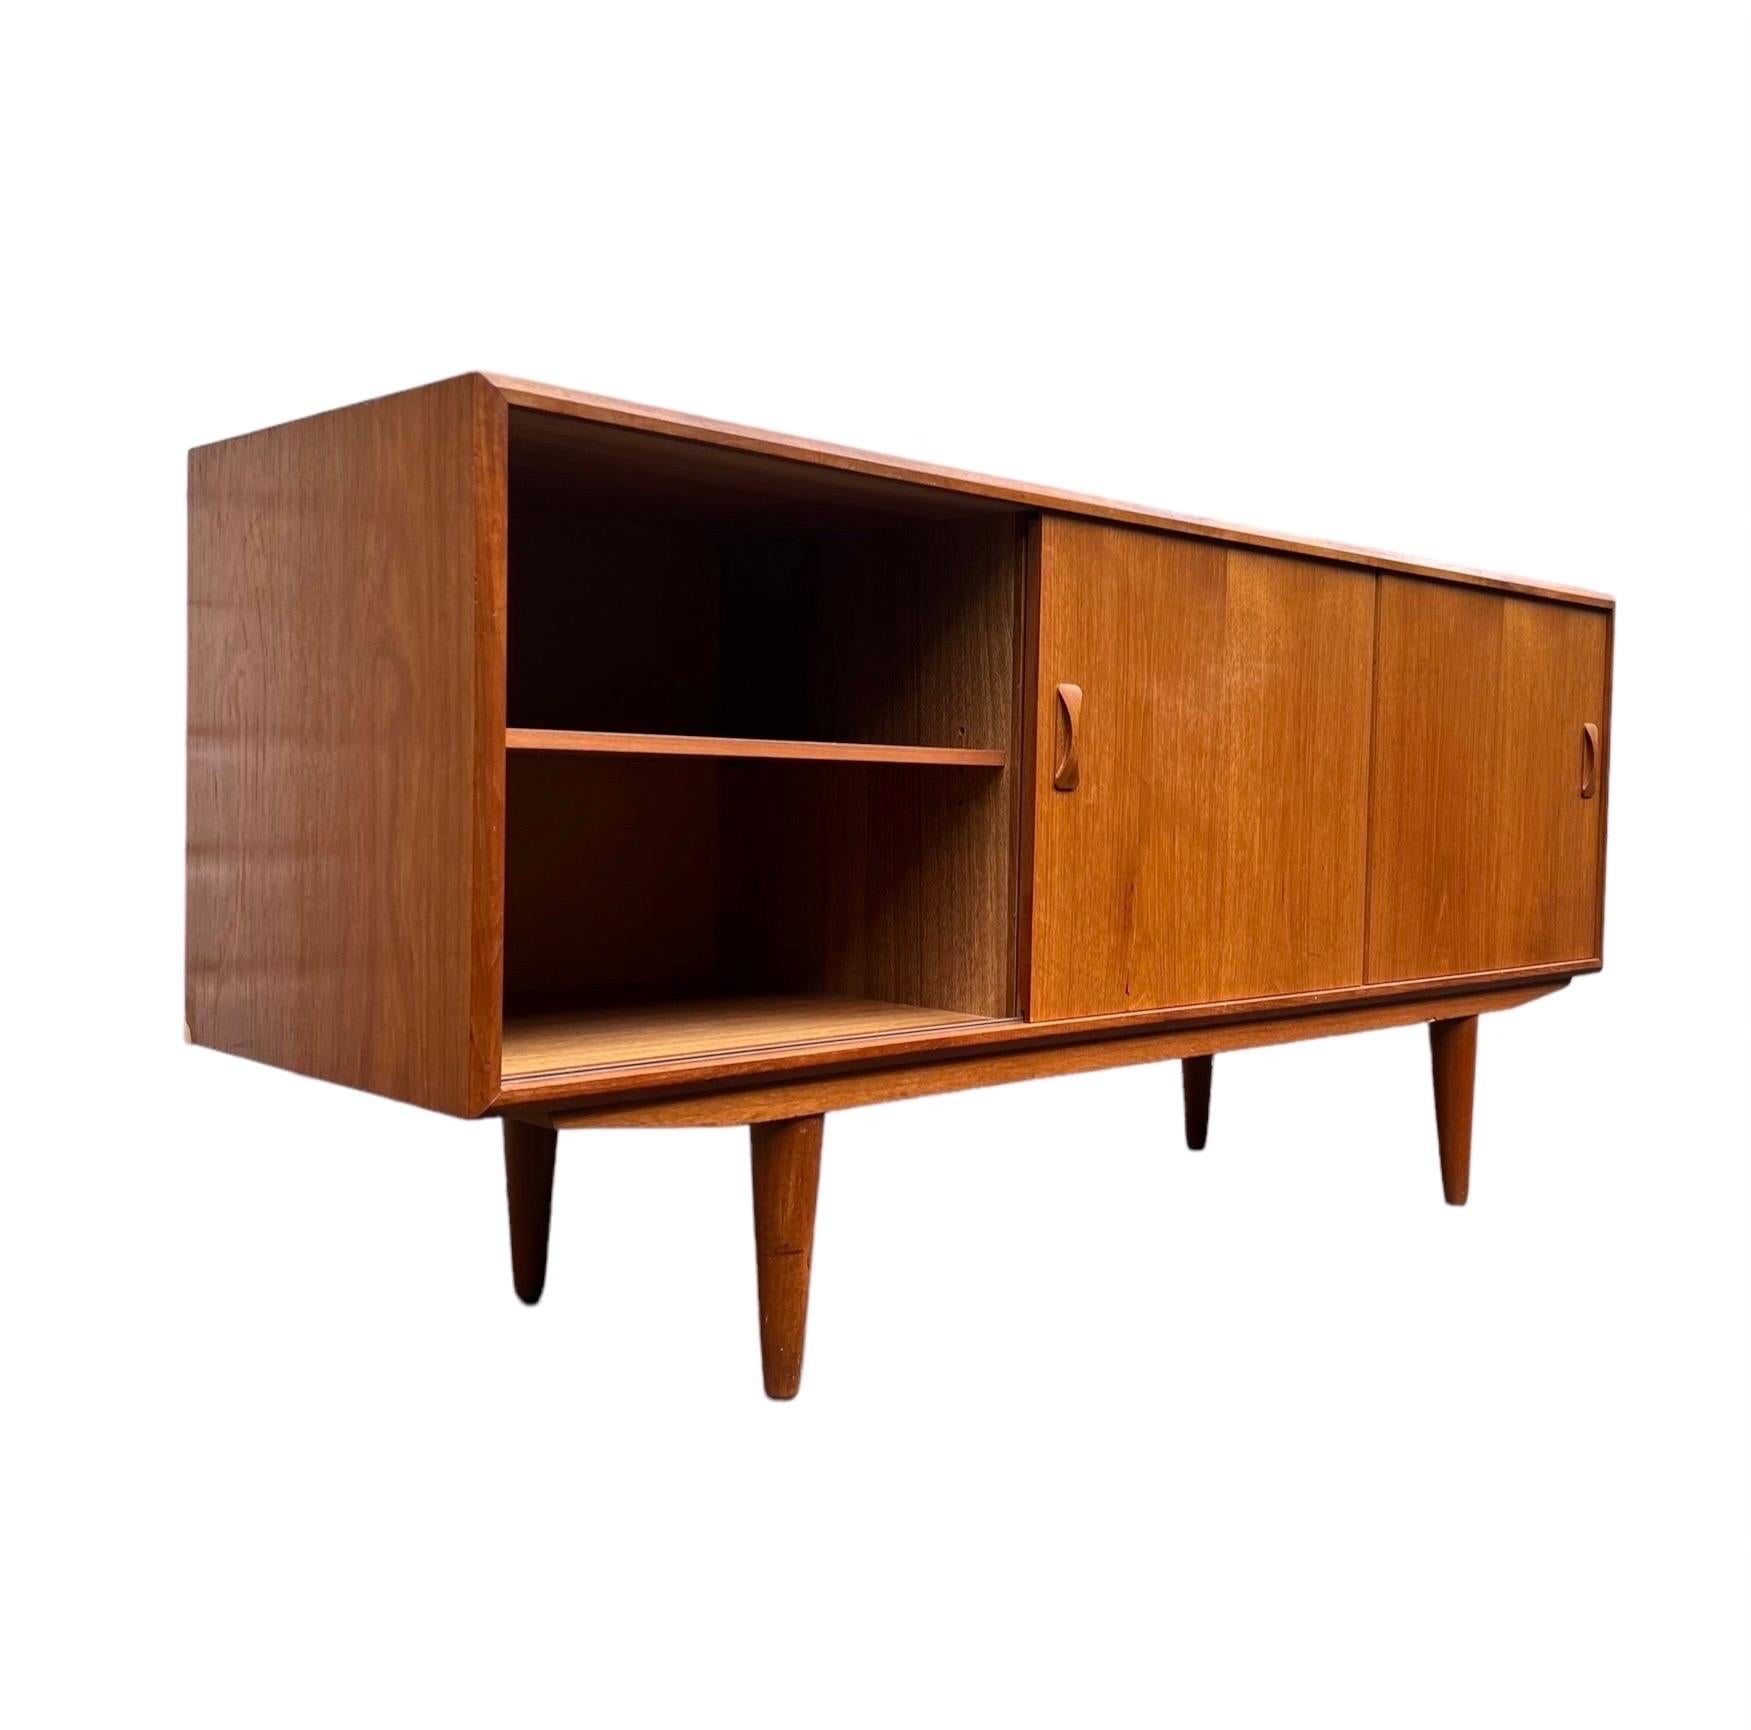 Vintage Danish Mid-Century Modern Credenza by Clausen and Sons Dovetail Drawers In Good Condition For Sale In Seattle, WA